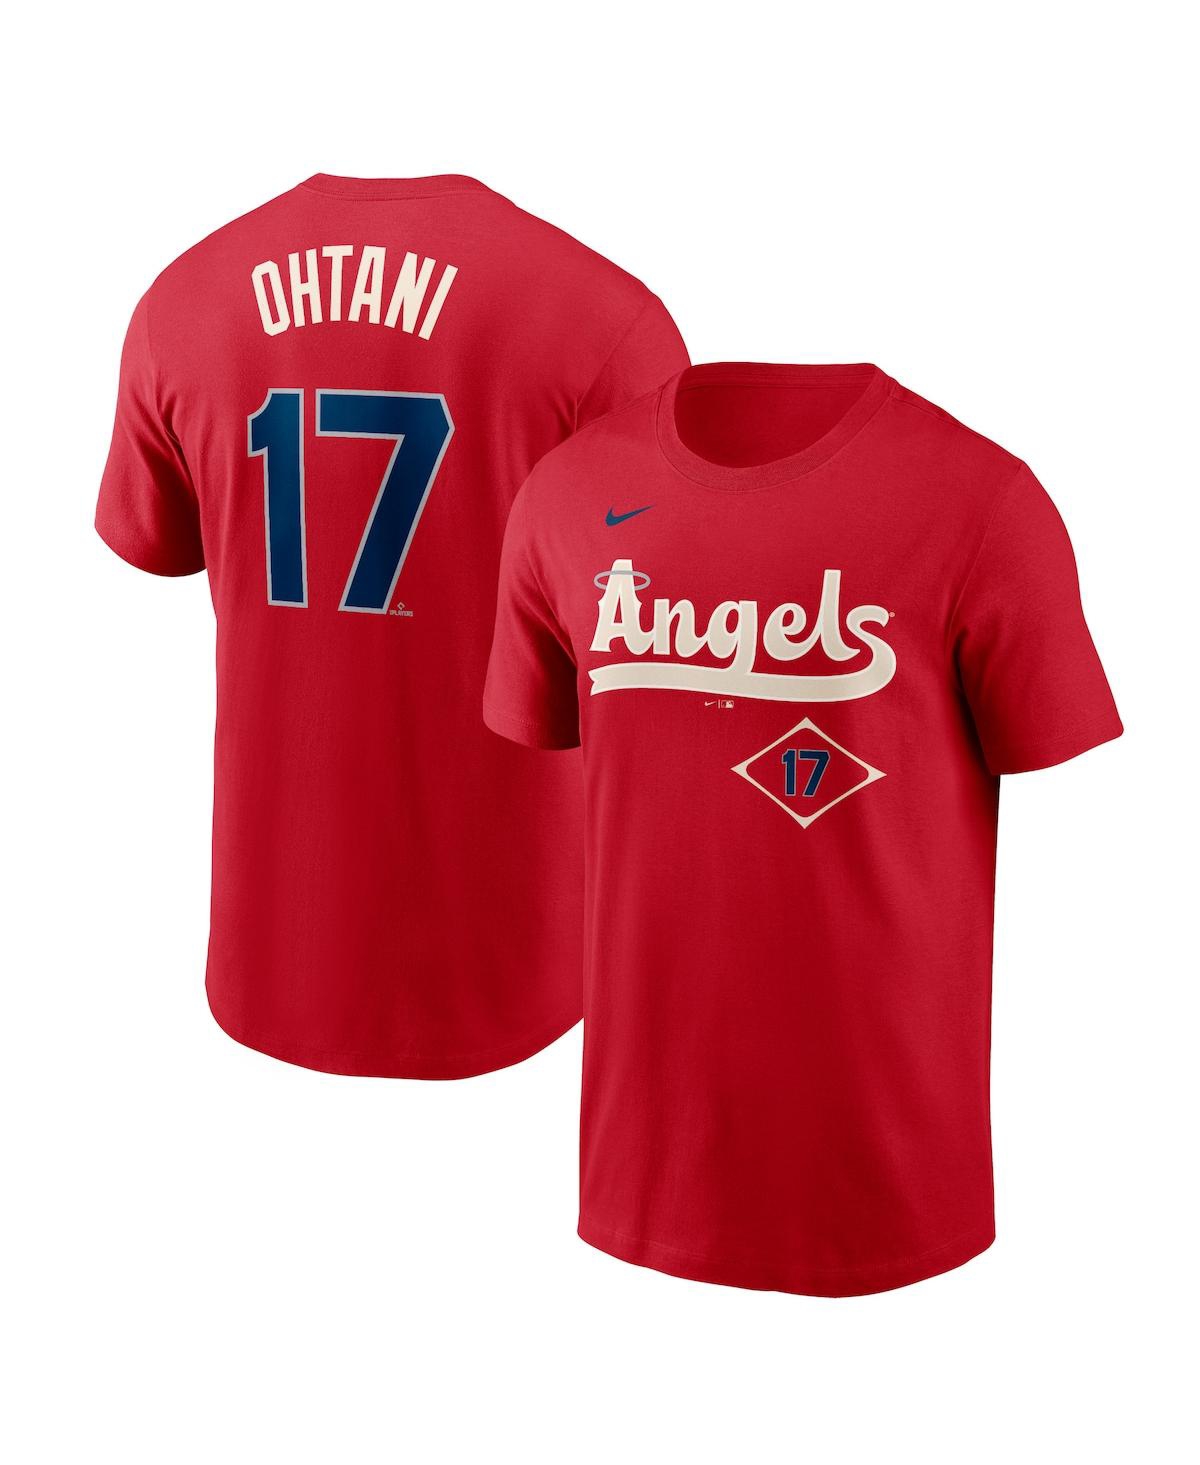 NIKE MEN'S NIKE SHOHEI OHTANI RED LOS ANGELES ANGELS CITY CONNECT NAME AND NUMBER T-SHIRT